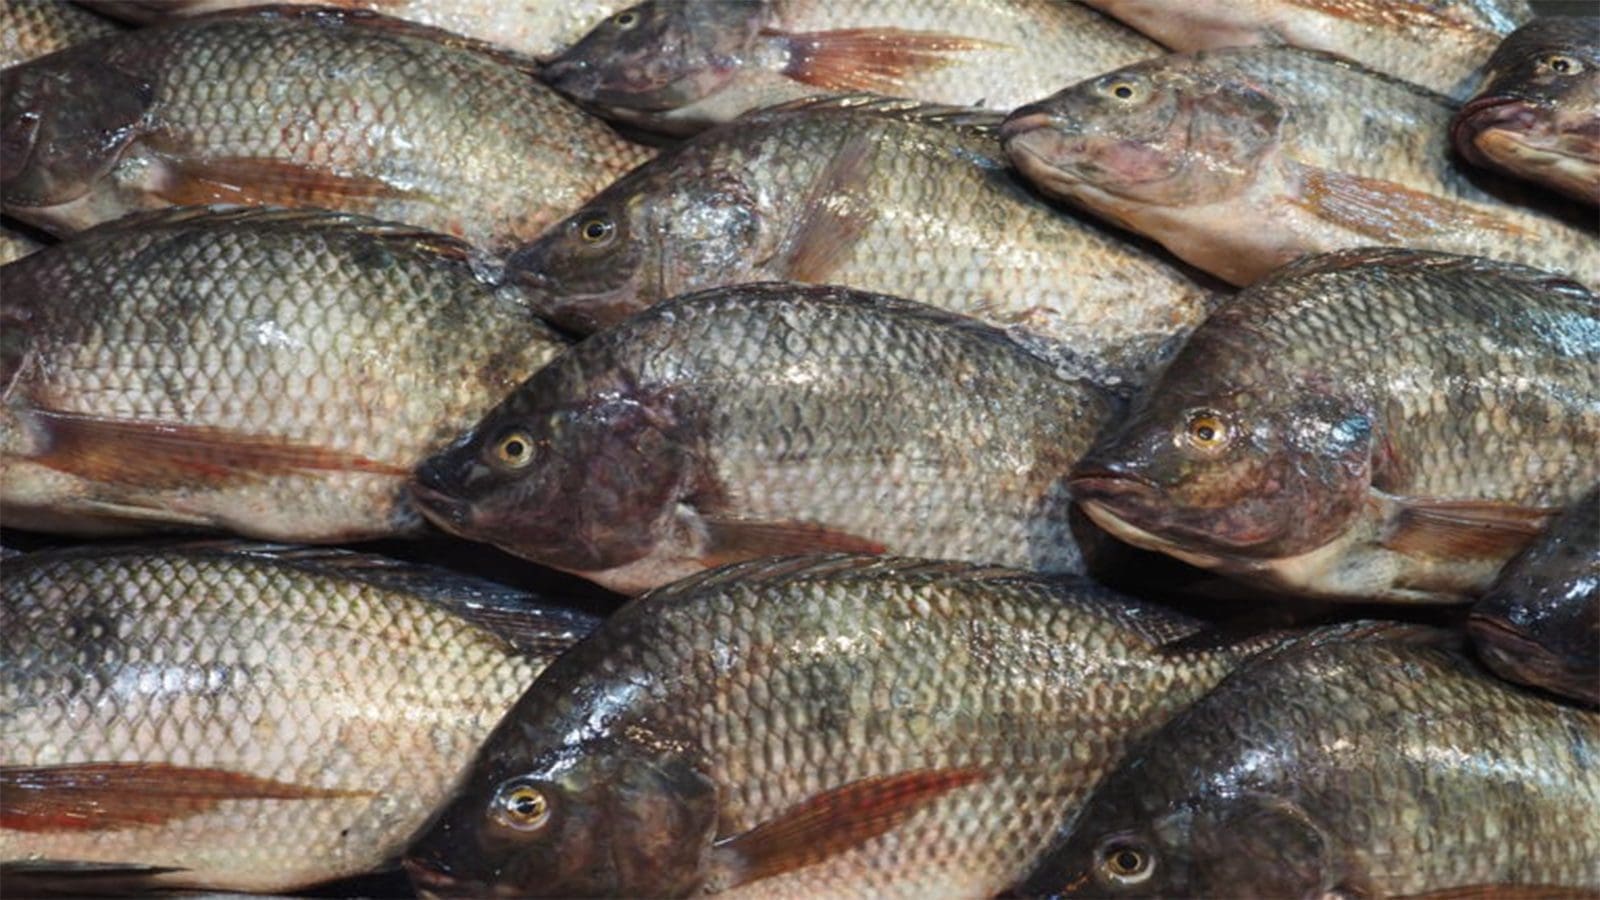 Study finds alarming levels of “forever chemicals” in U.S freshwater fish